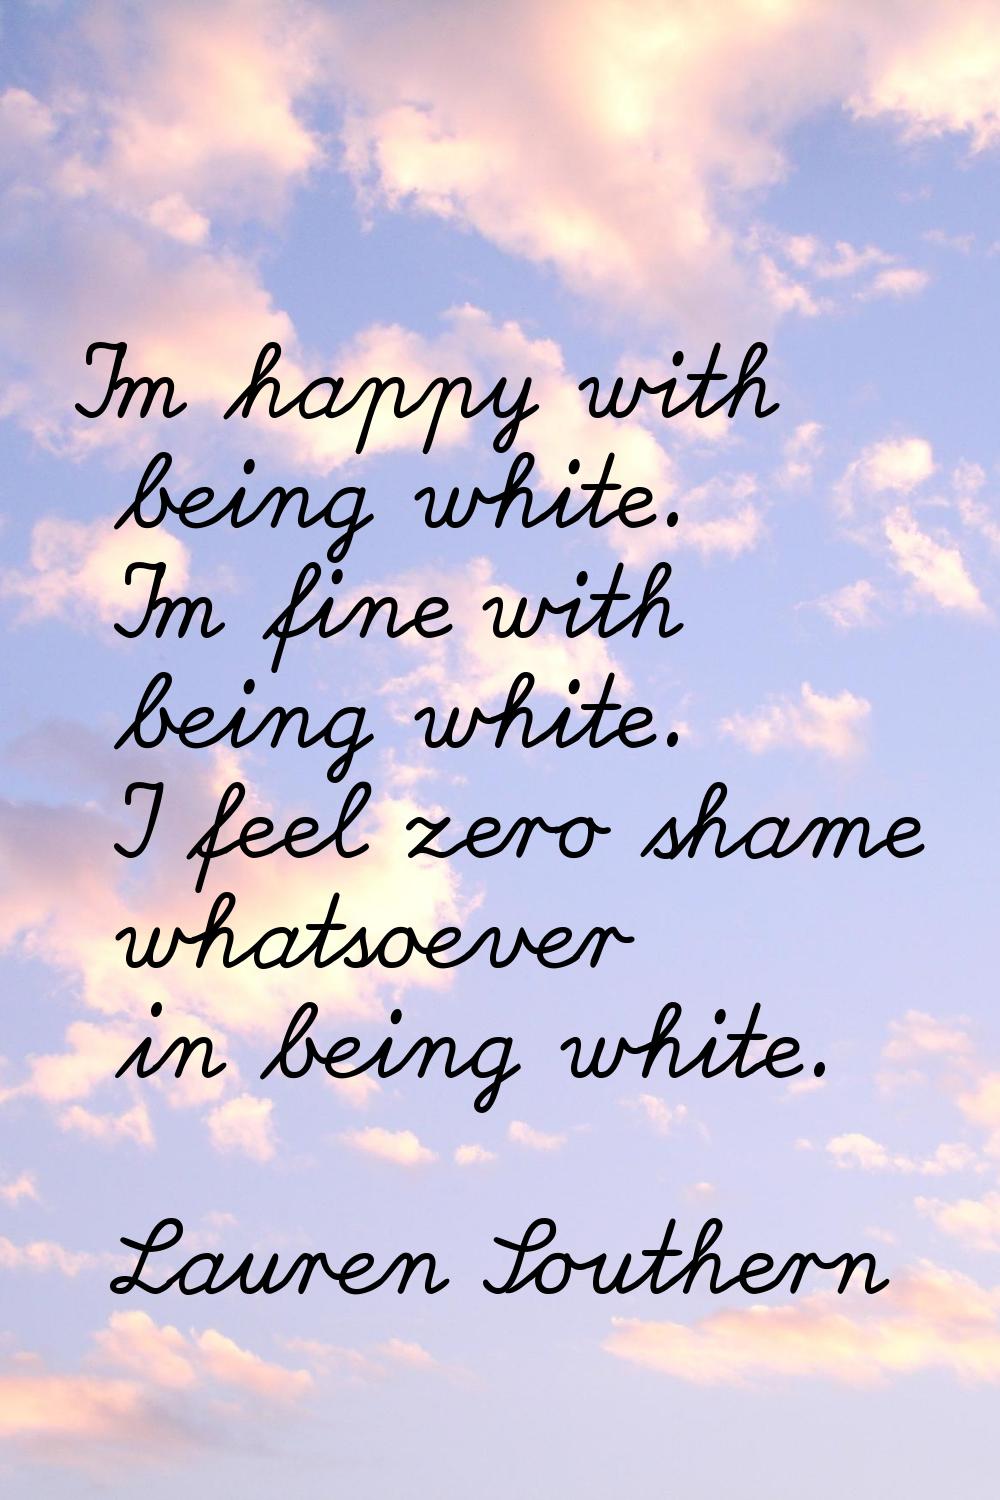 I'm happy with being white. I'm fine with being white. I feel zero shame whatsoever in being white.